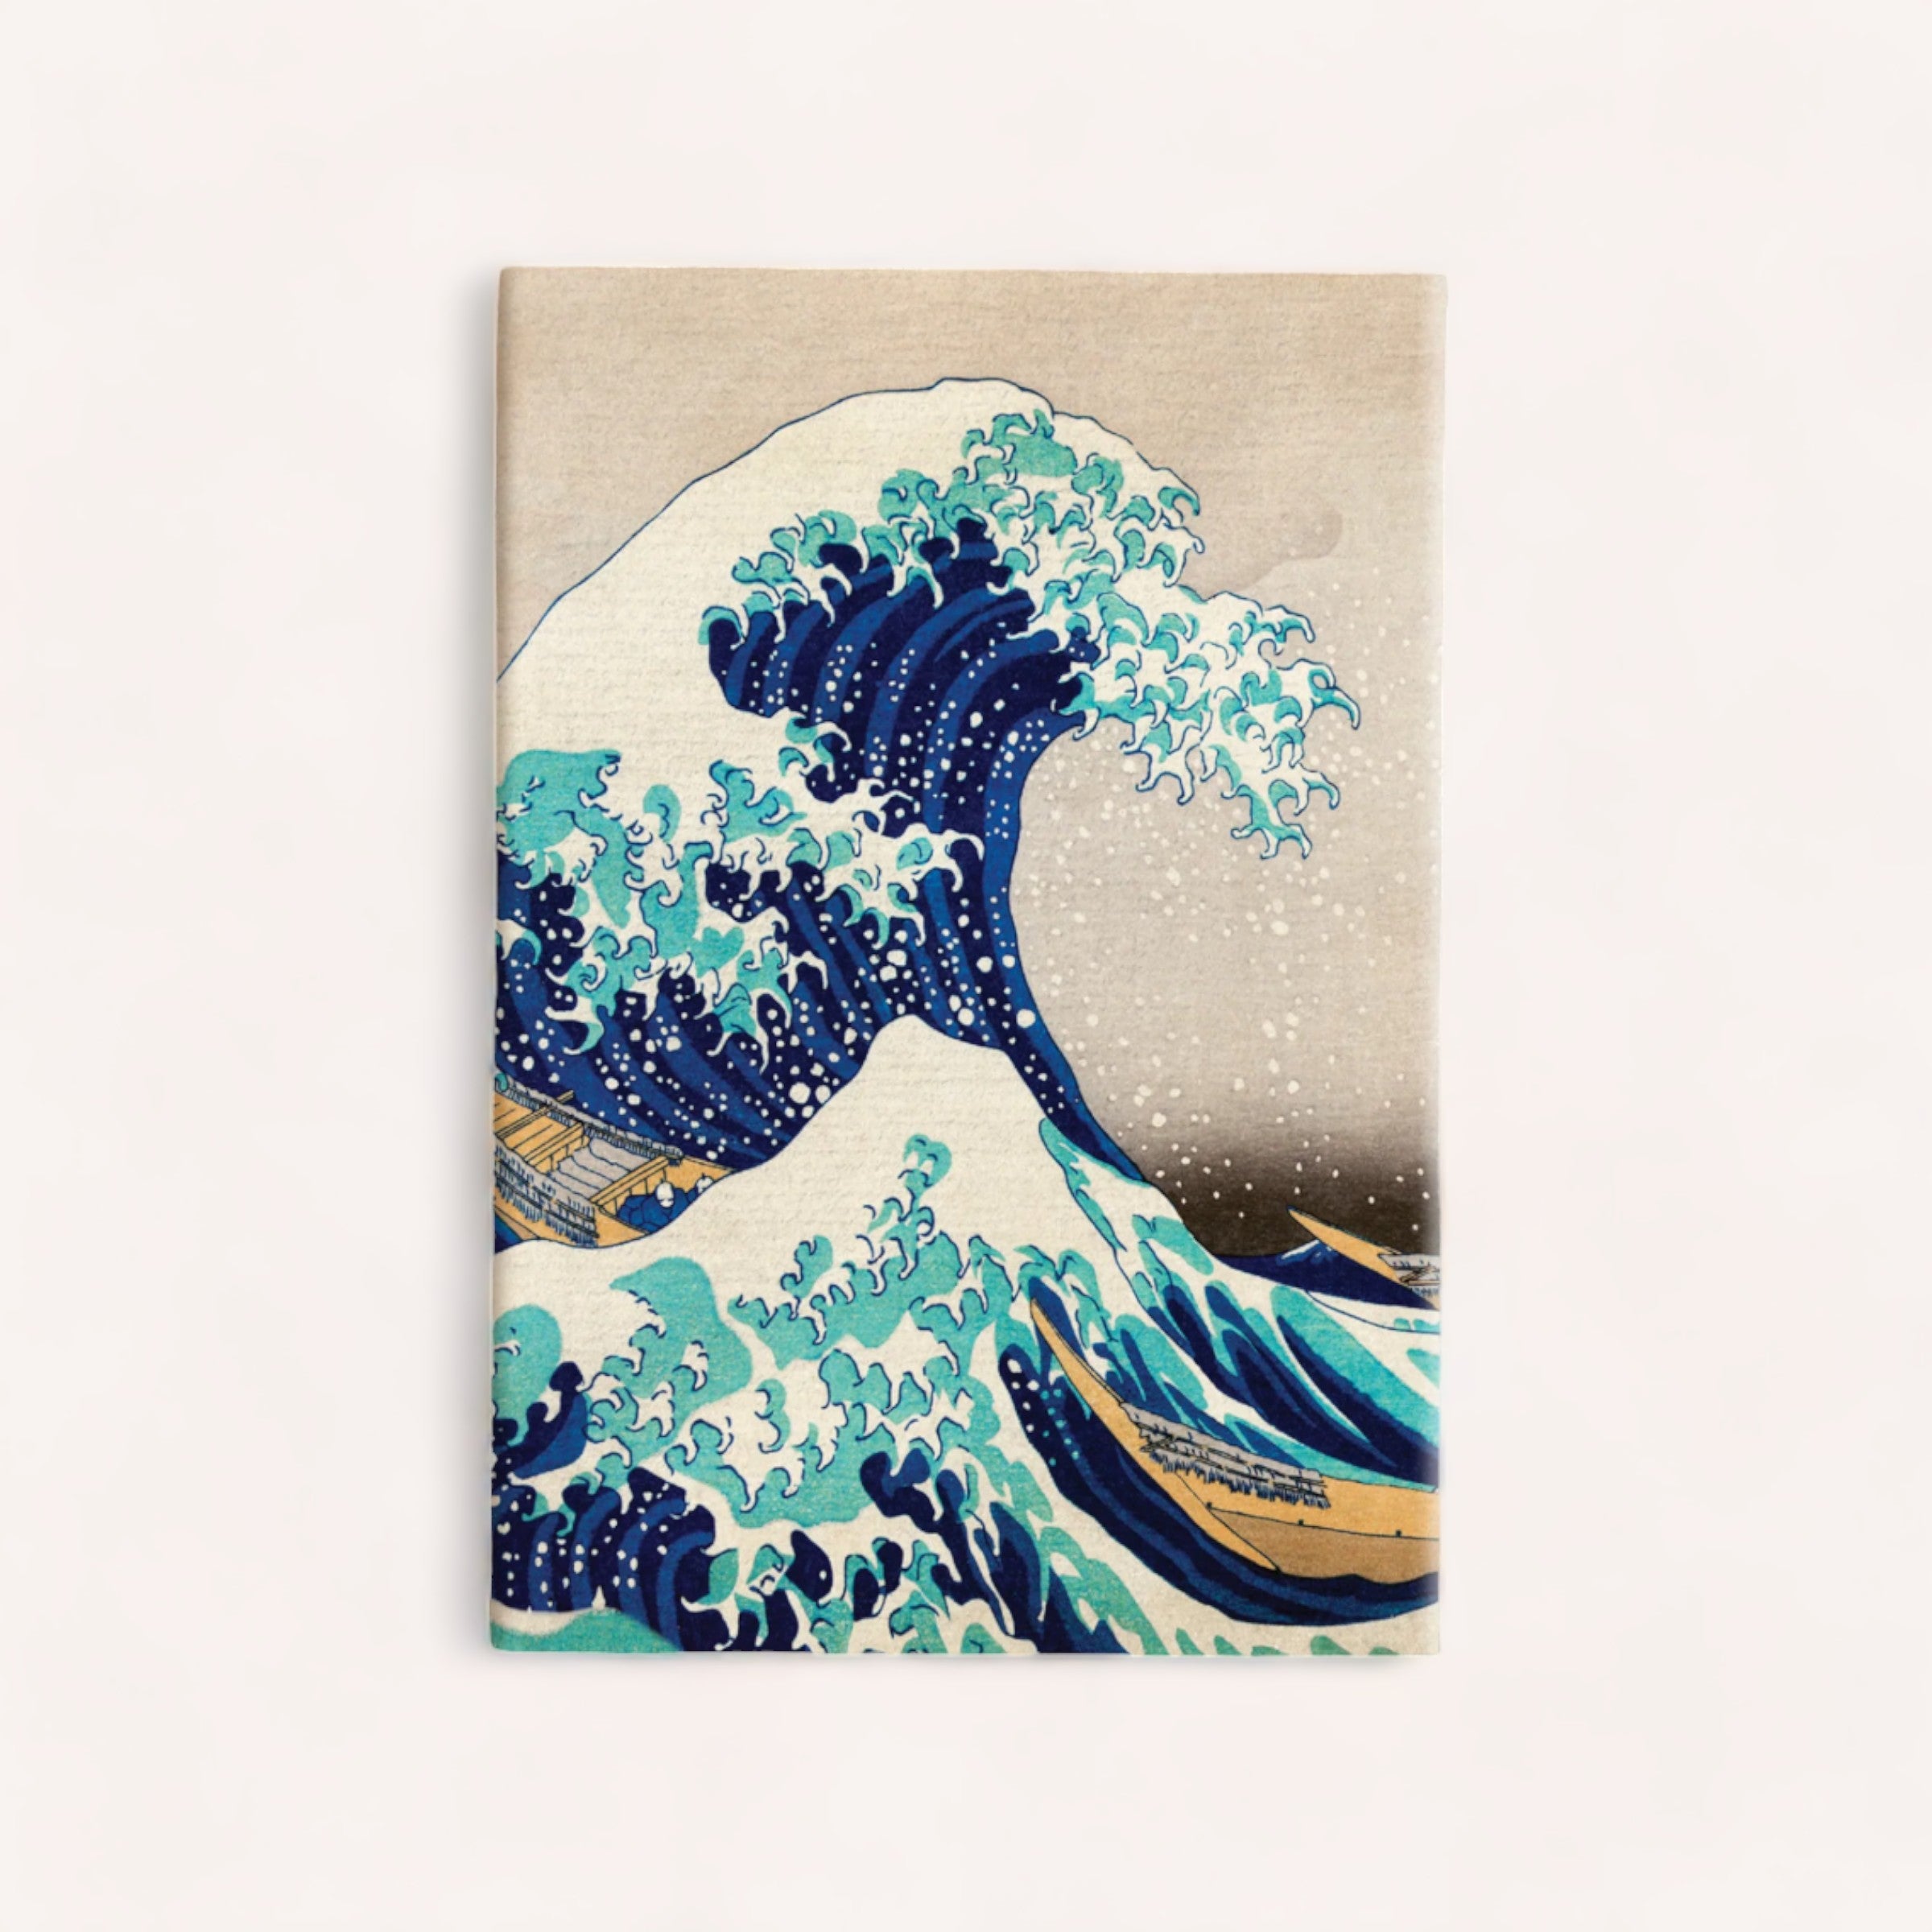 A Waves Notebook featuring "The Great Wave off Kanagawa," the iconic woodblock print by Japanese artist Hokusai, depicting a powerful and frothy ocean wave cresting with Mount Fuji in the background. from Ink Bomb.